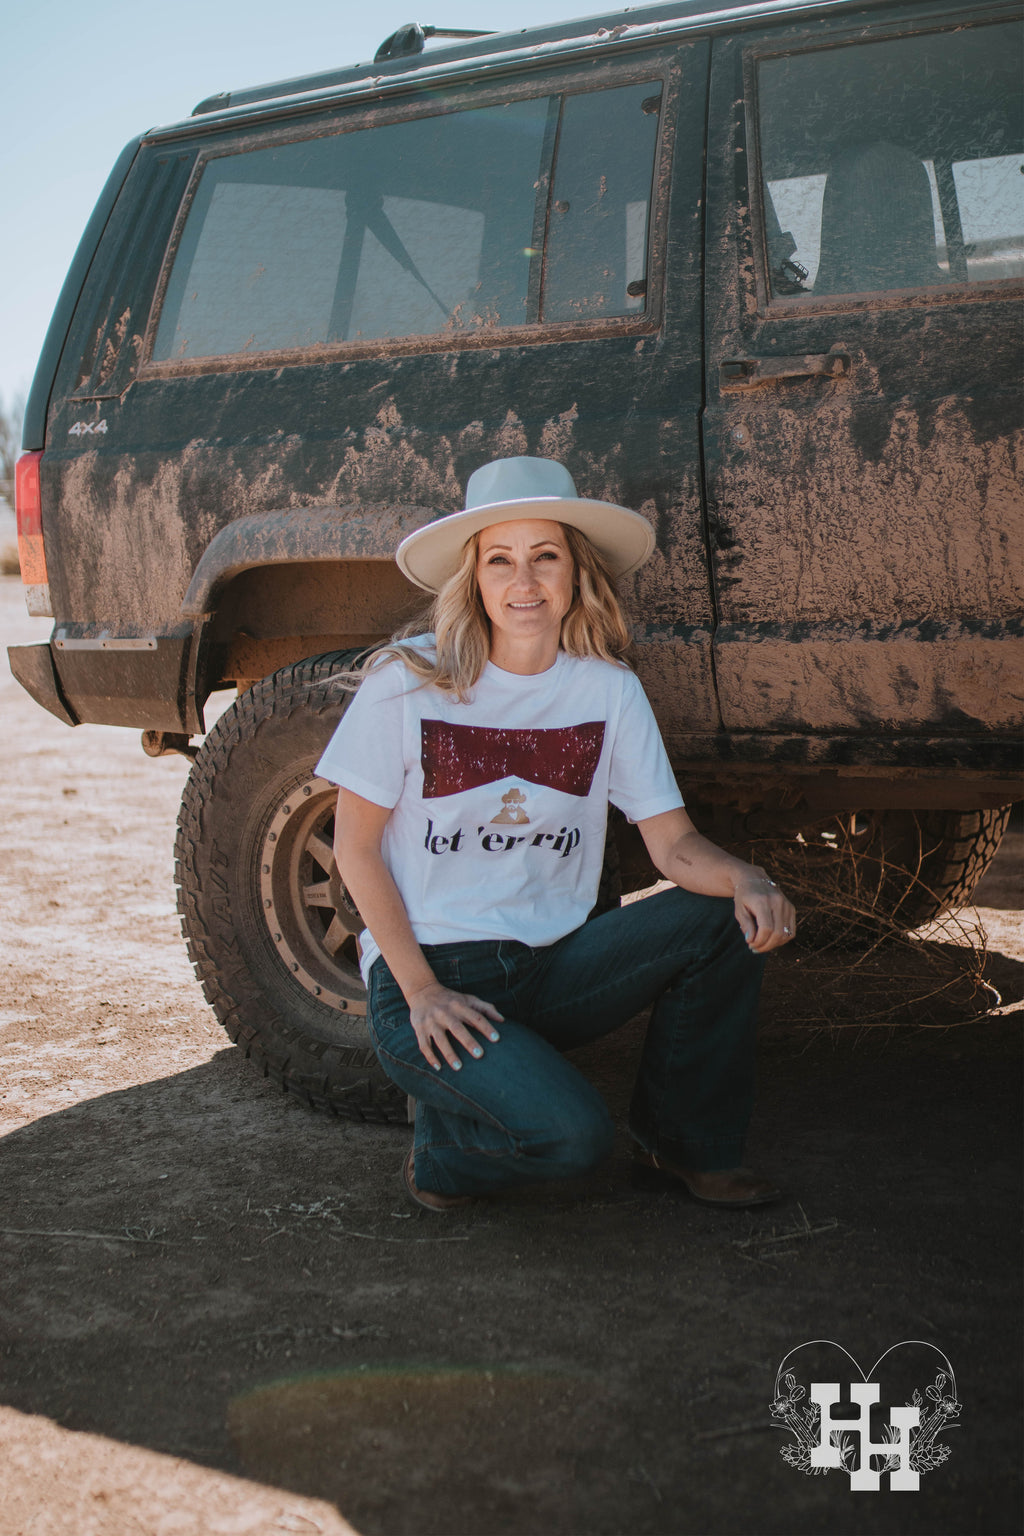 A girl squating beside a muddy jeep wearing a mint green hat, jeans, and a white tshirt that that says Let'er rip. The tshirt also has a small gold head above the saying of Rip from the Yellowstone show, then the red look of a marlboro box above that.